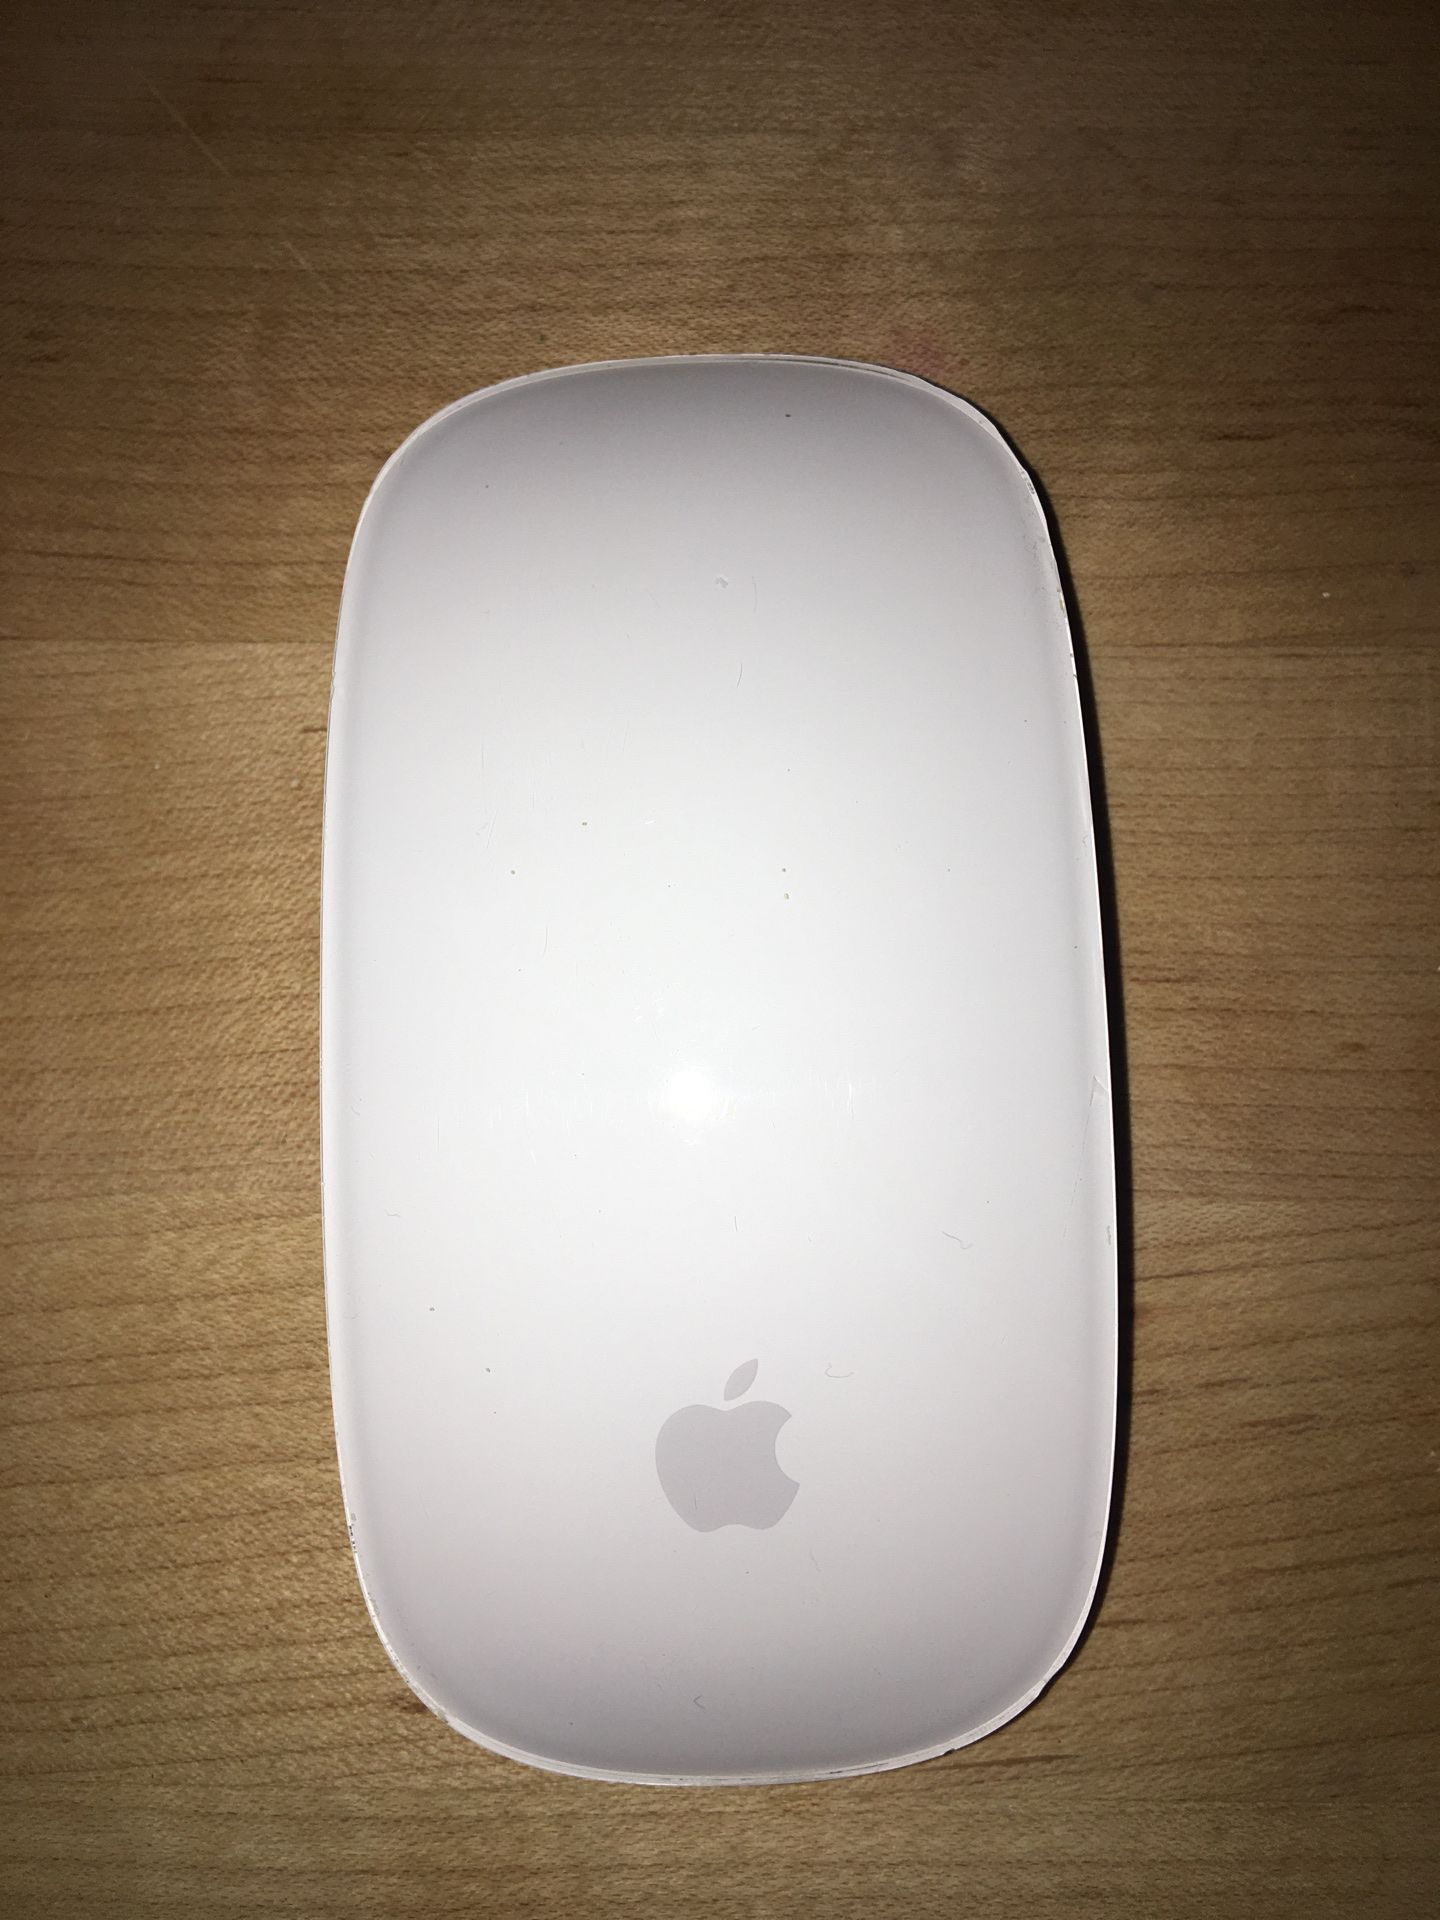 Apple magic mouse (bluetooth / wireless) for mac computers and laptops